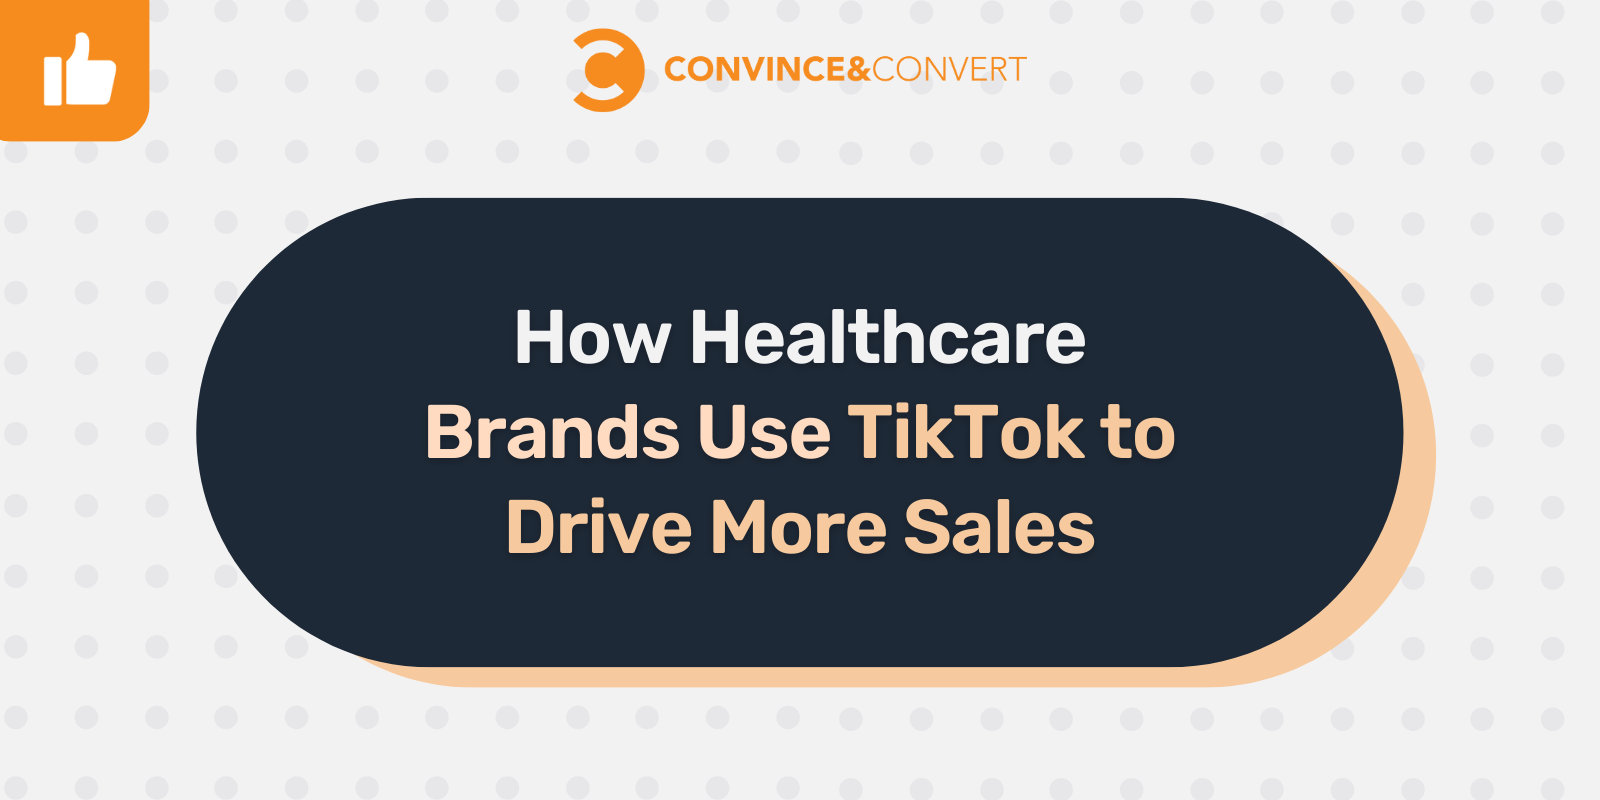 How Healthcare Brands Use TikTok to Drive More Sales